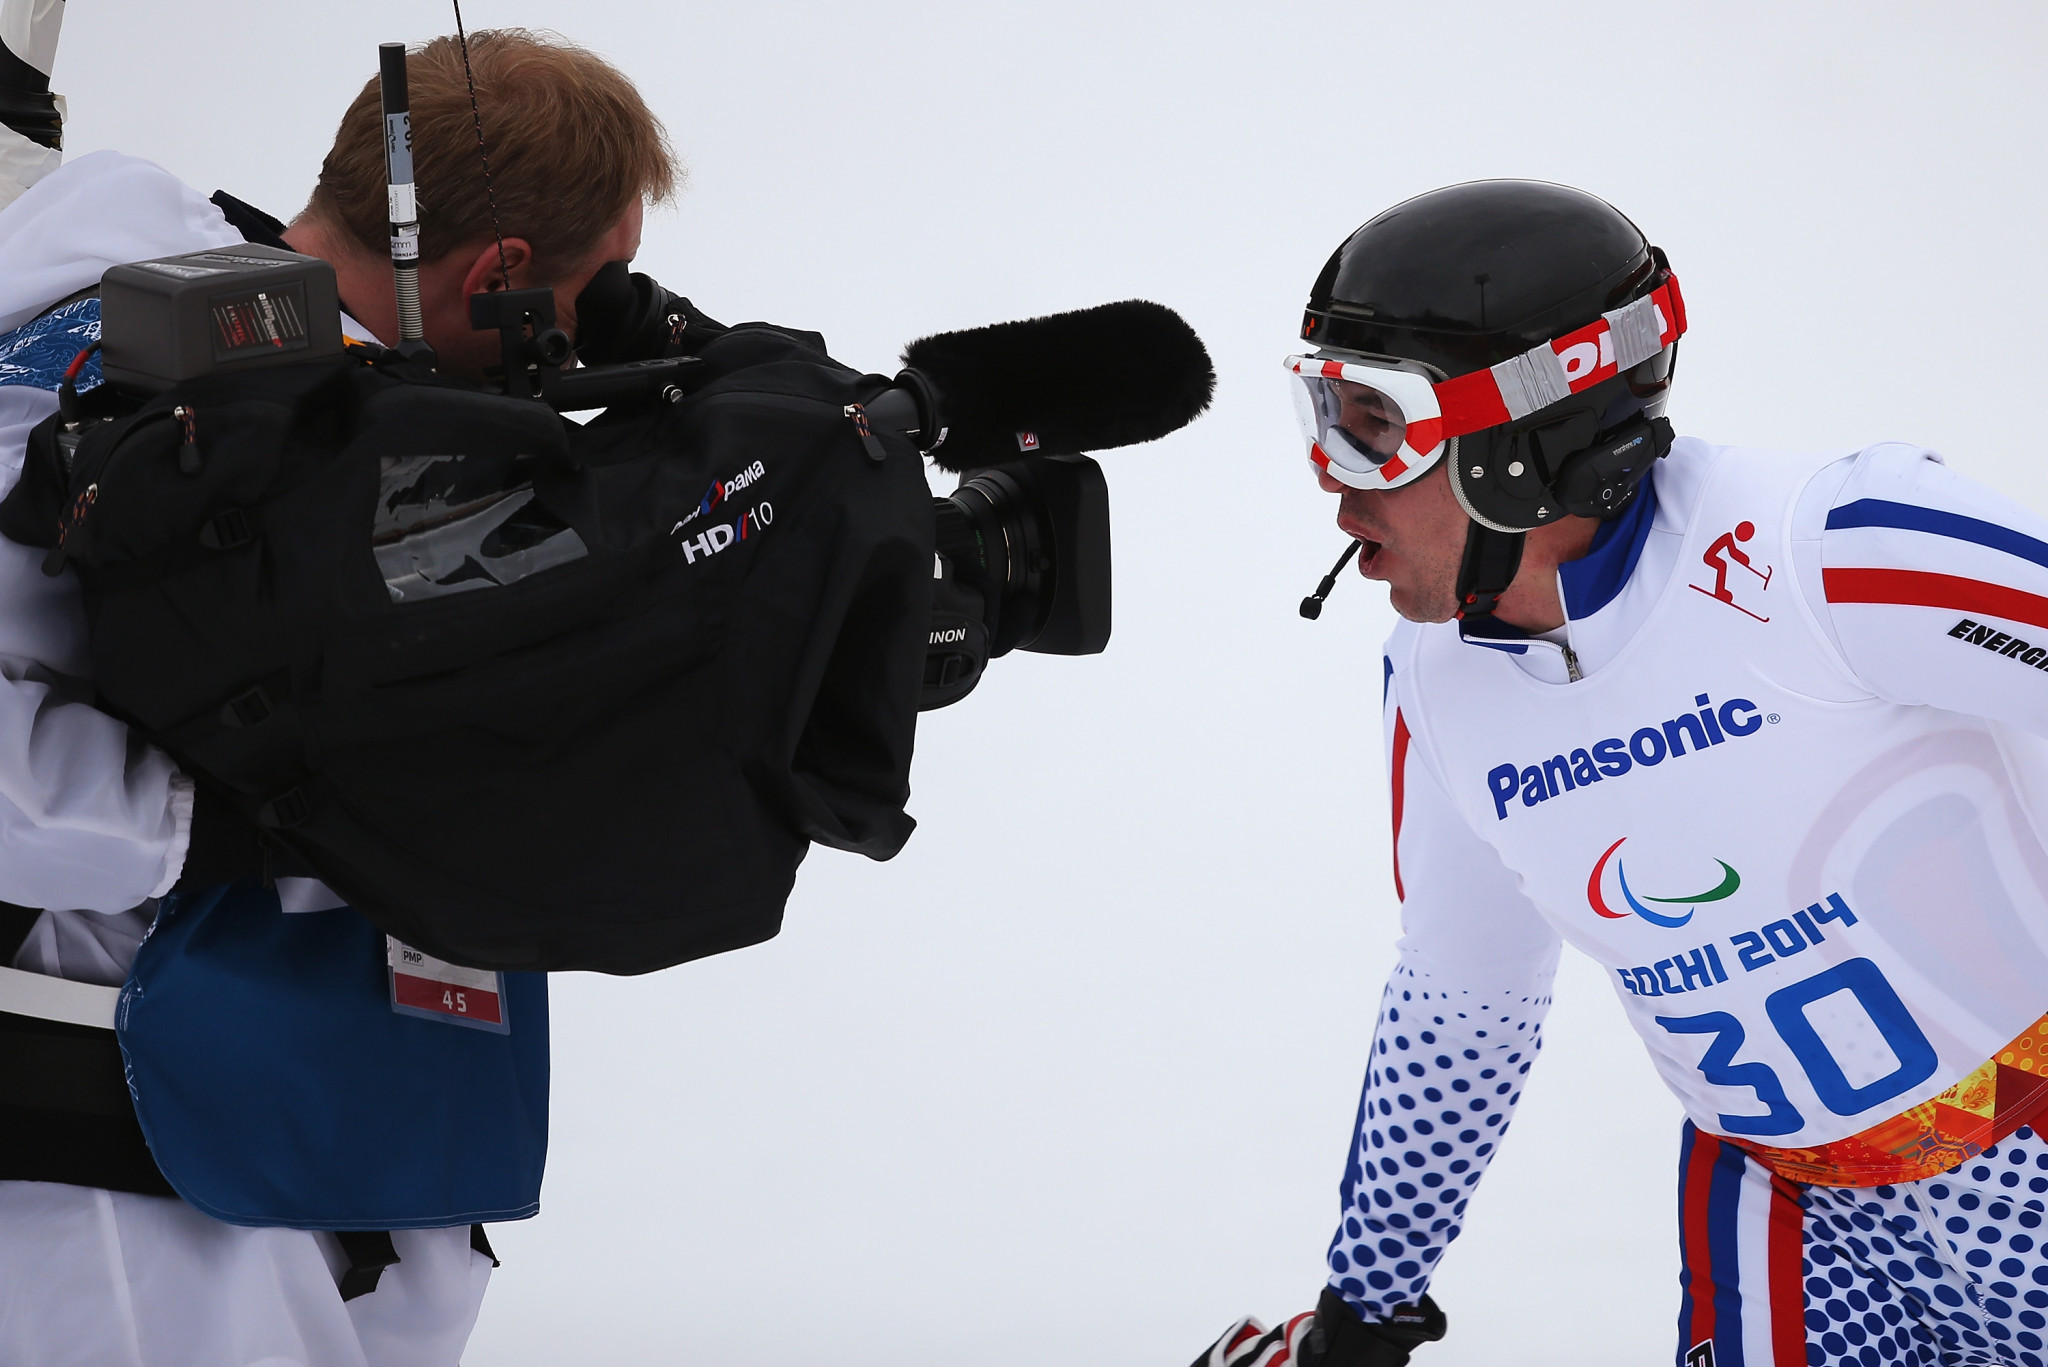 The European Broadcasting Union has been managing the media rights for the Paralympics since Sochi 2014 ©Getty Images